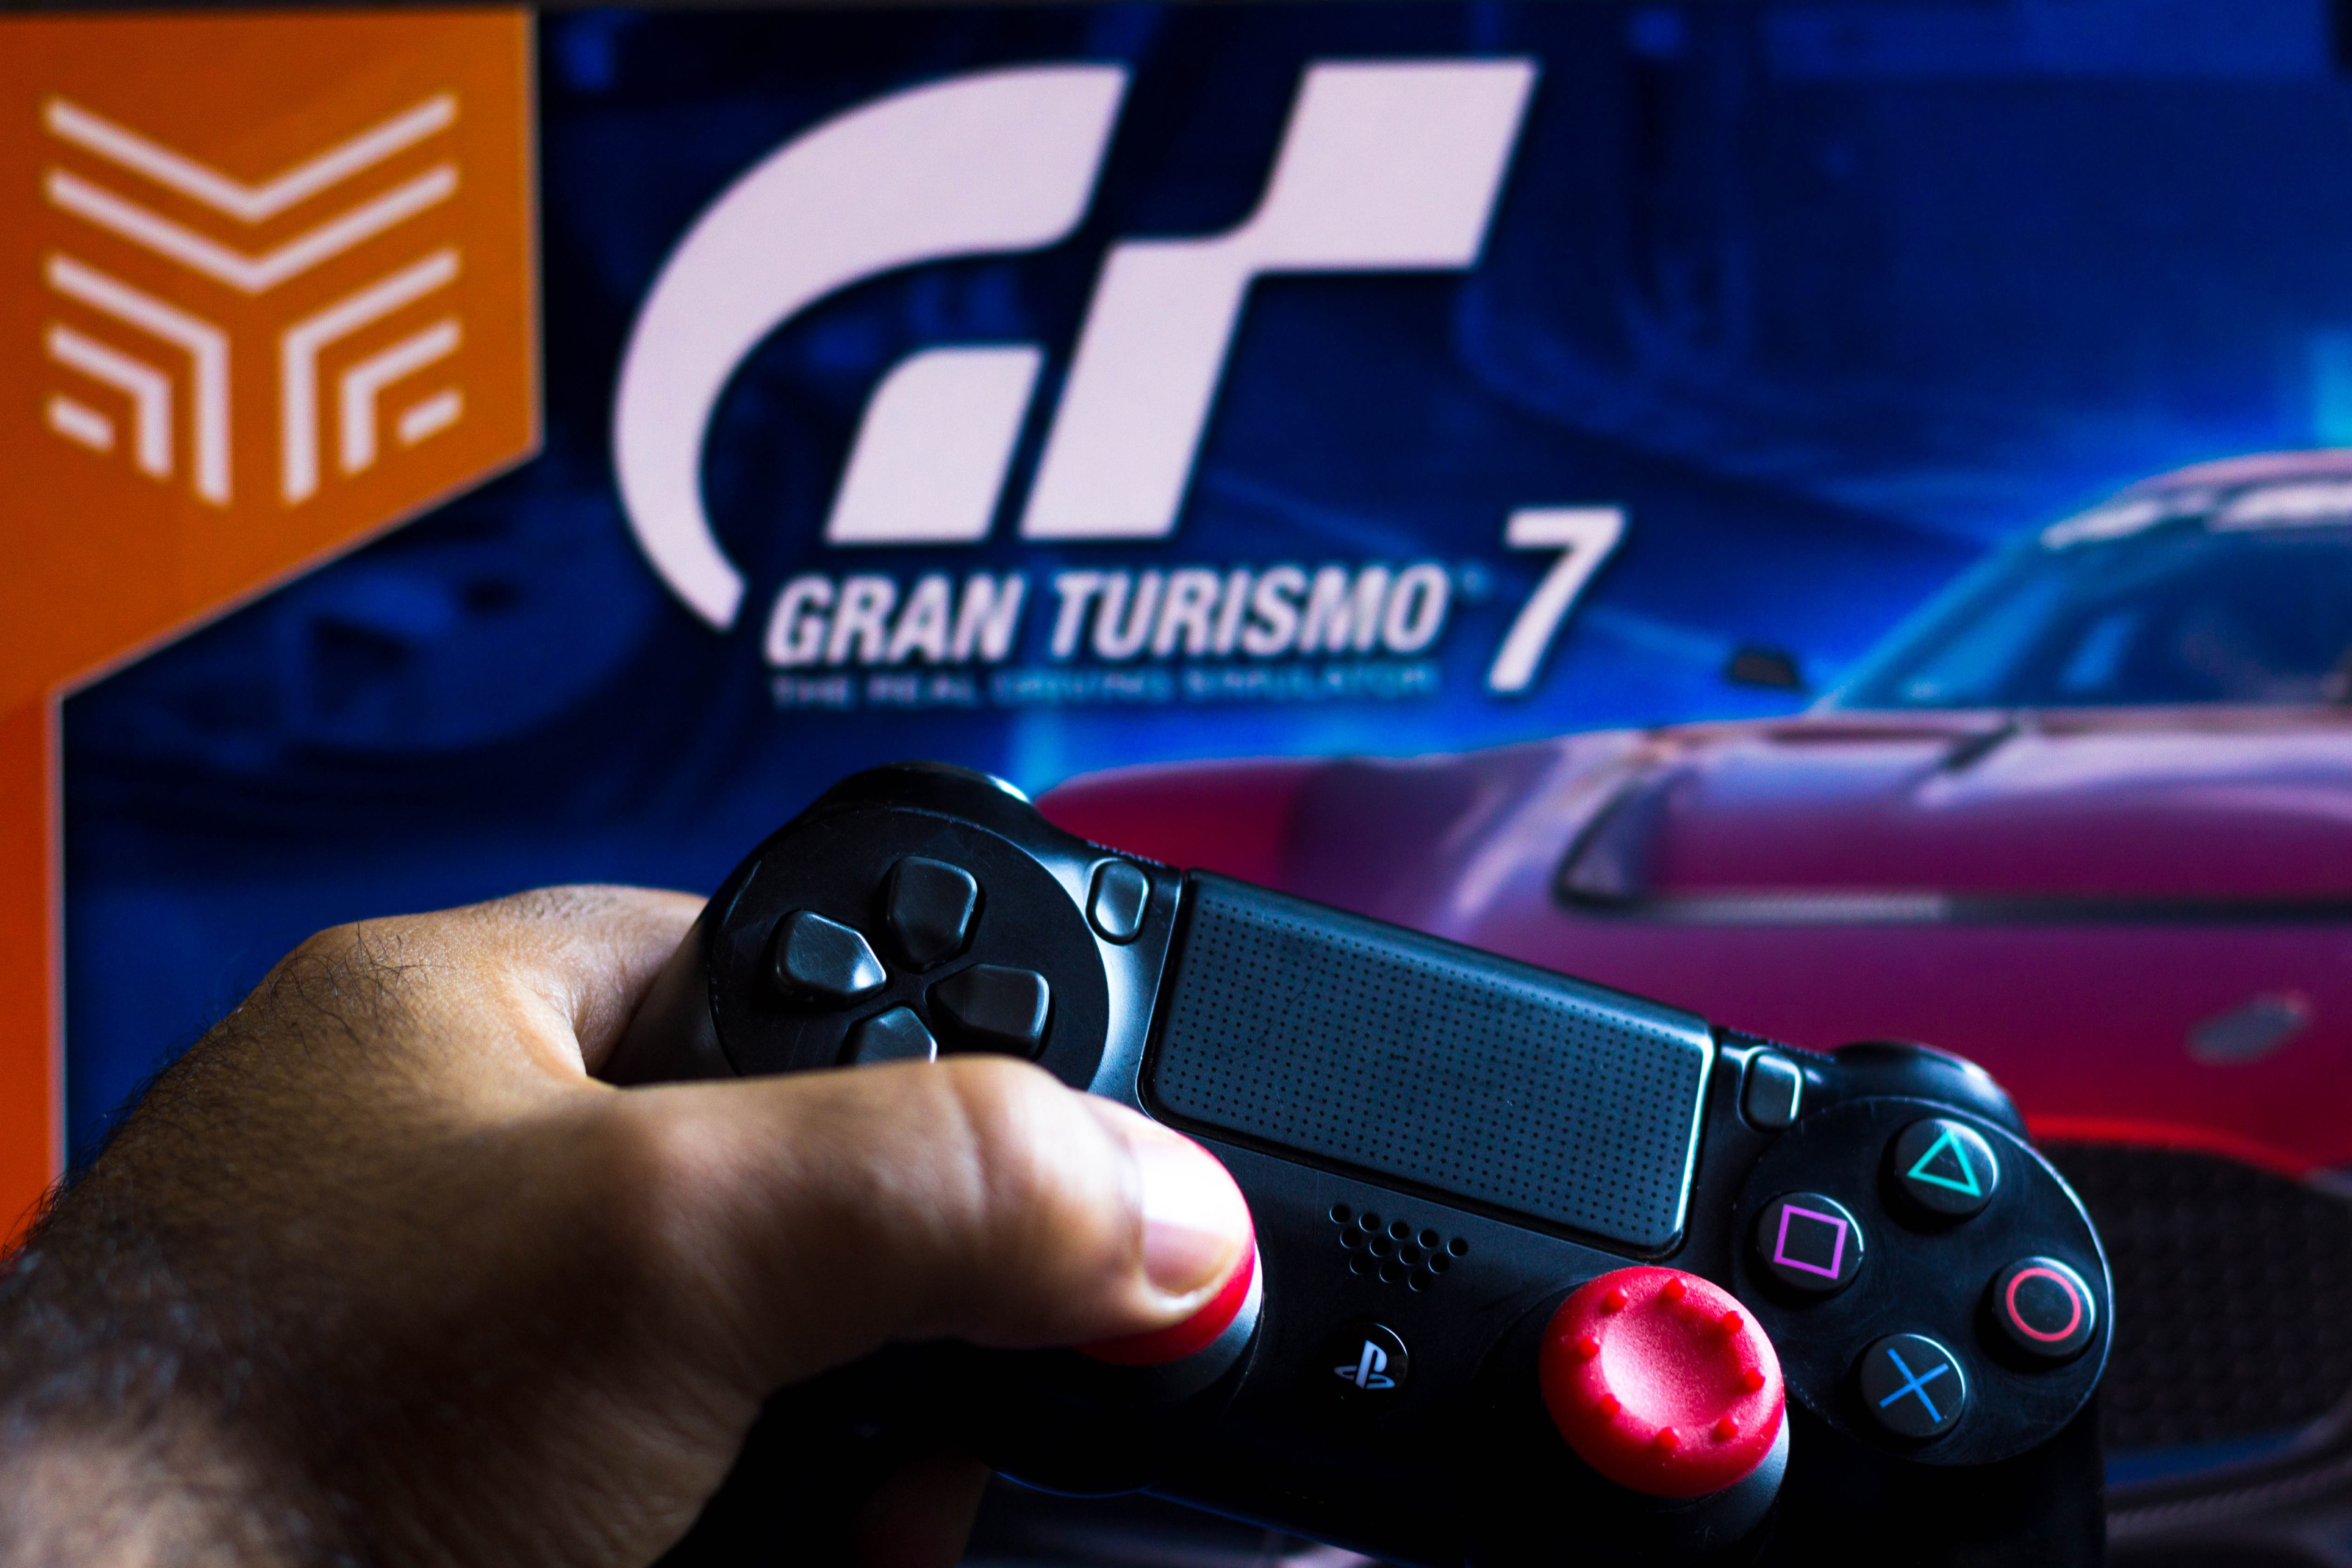 Gran Turismo 7 up for pre order, PS5 Standard, PS4 Standard and